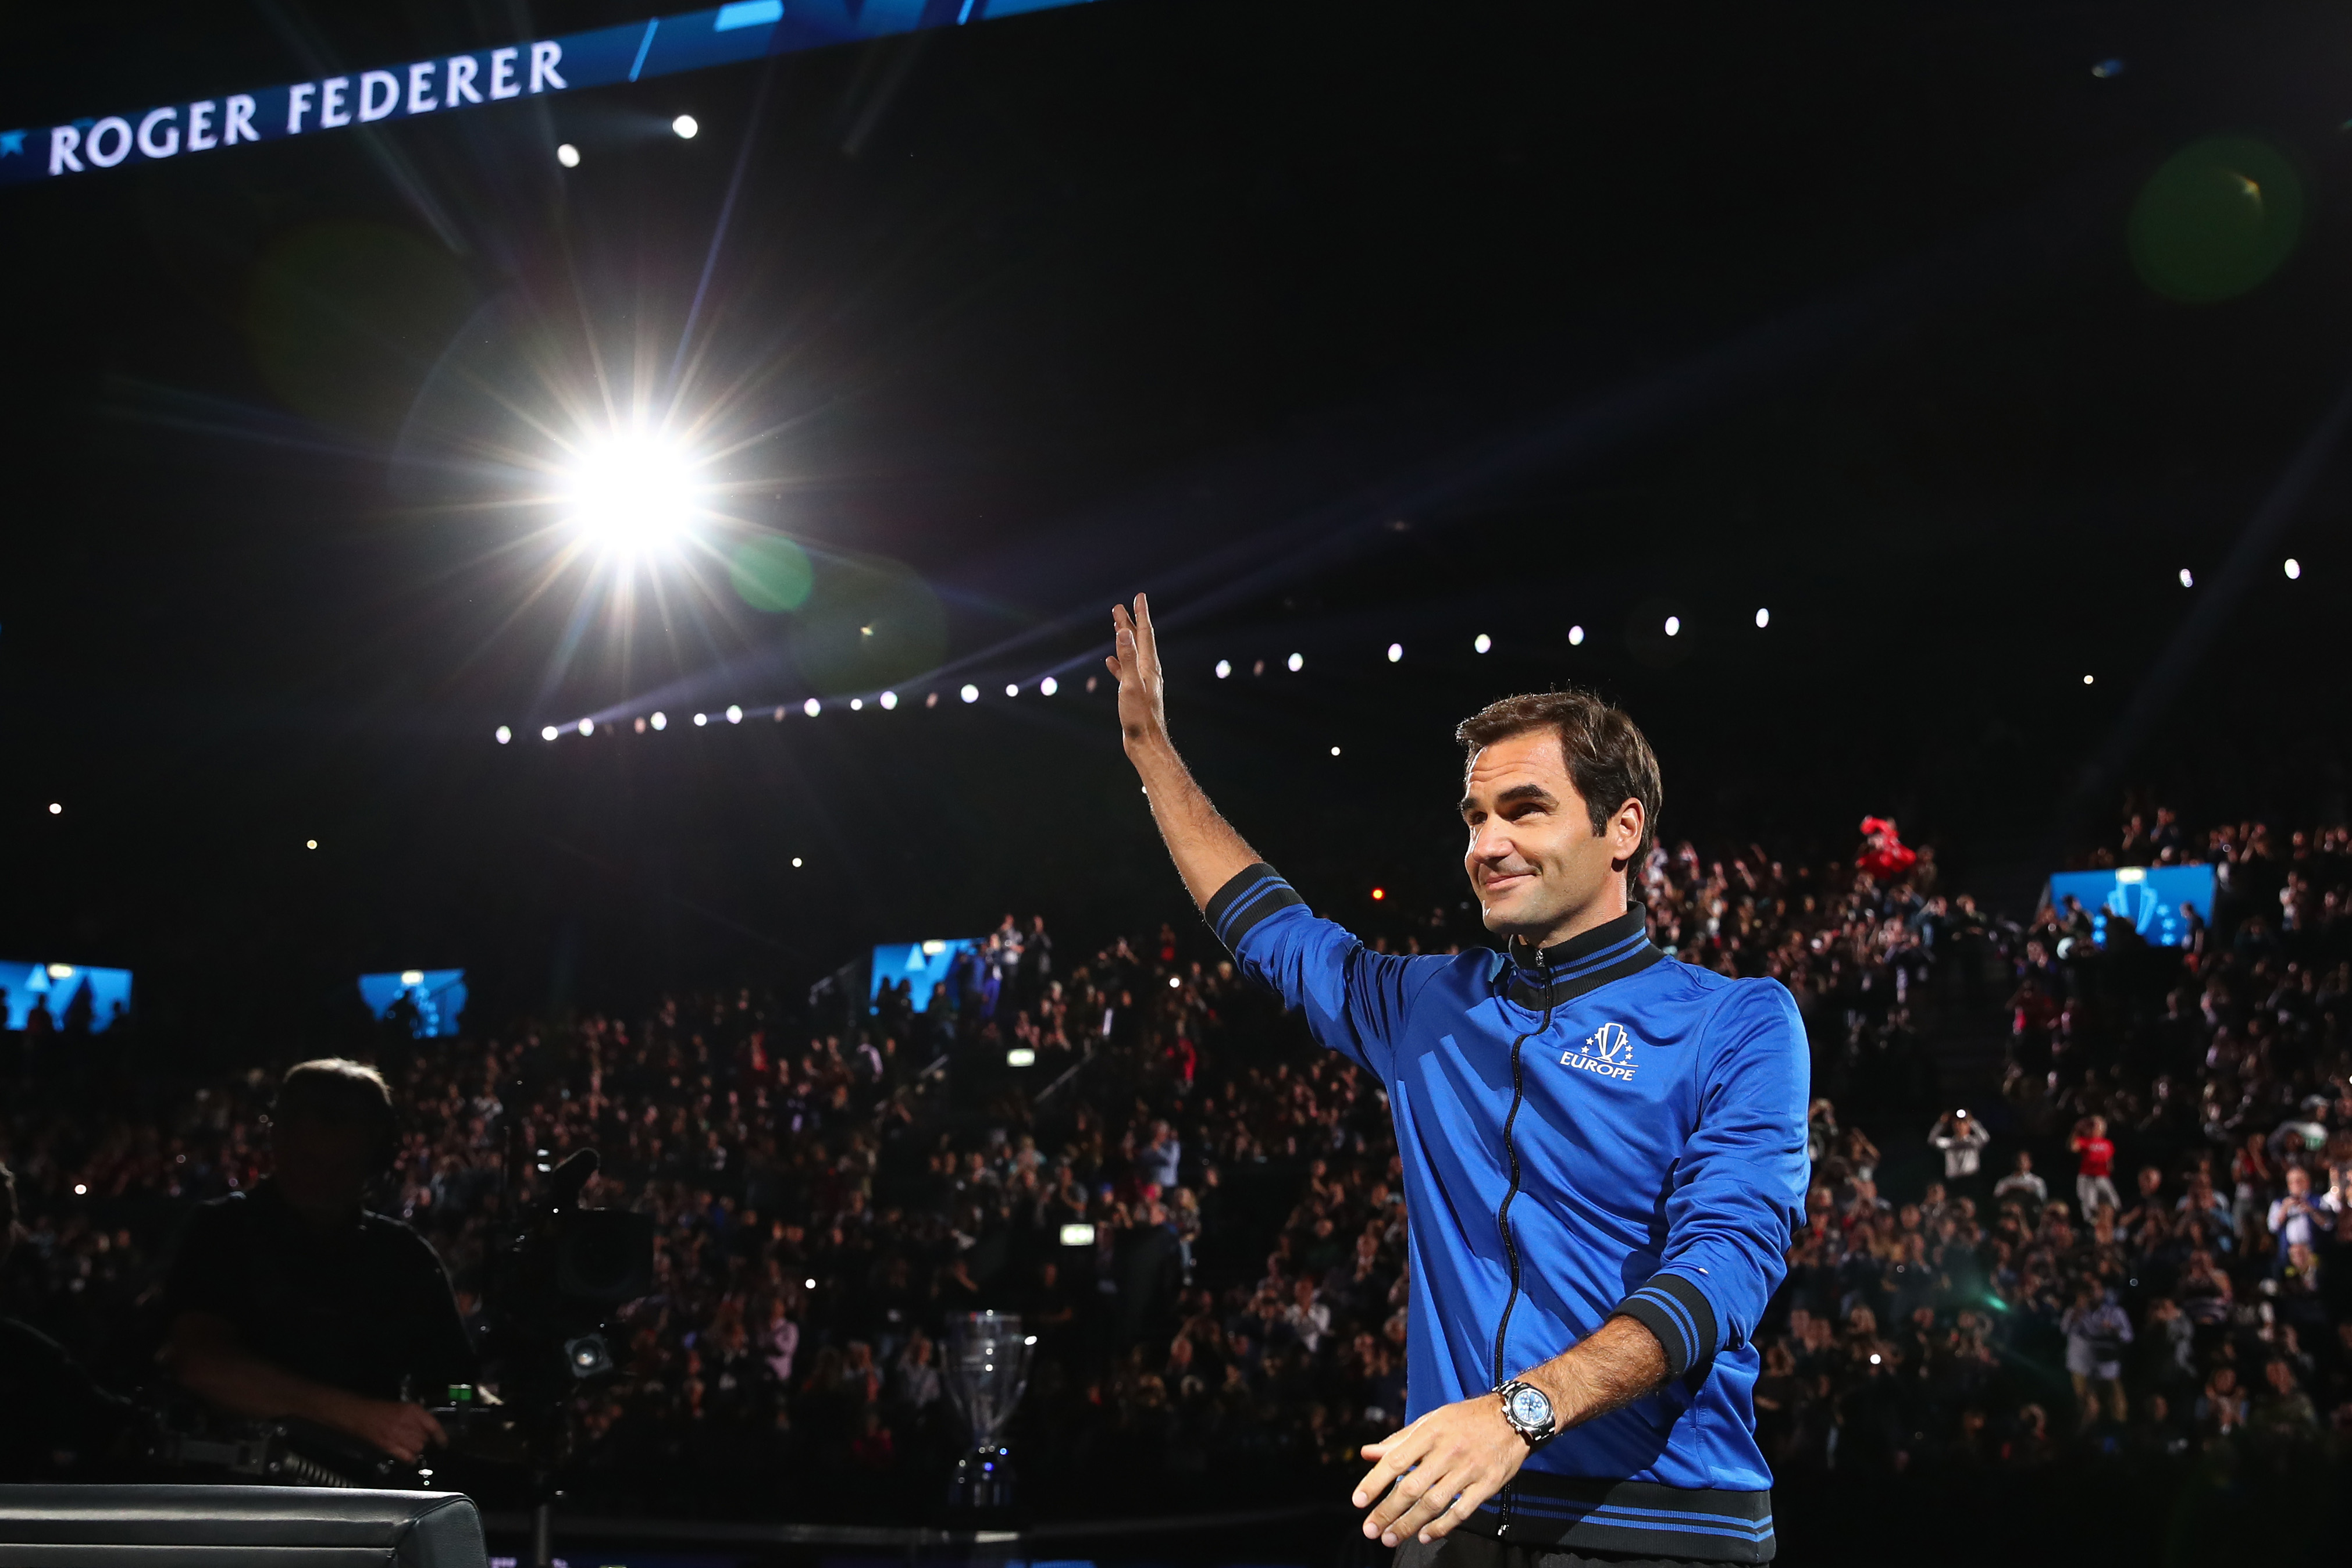 Roger Federer Plays Last Match at Laver Cup in Doubles With Nadal